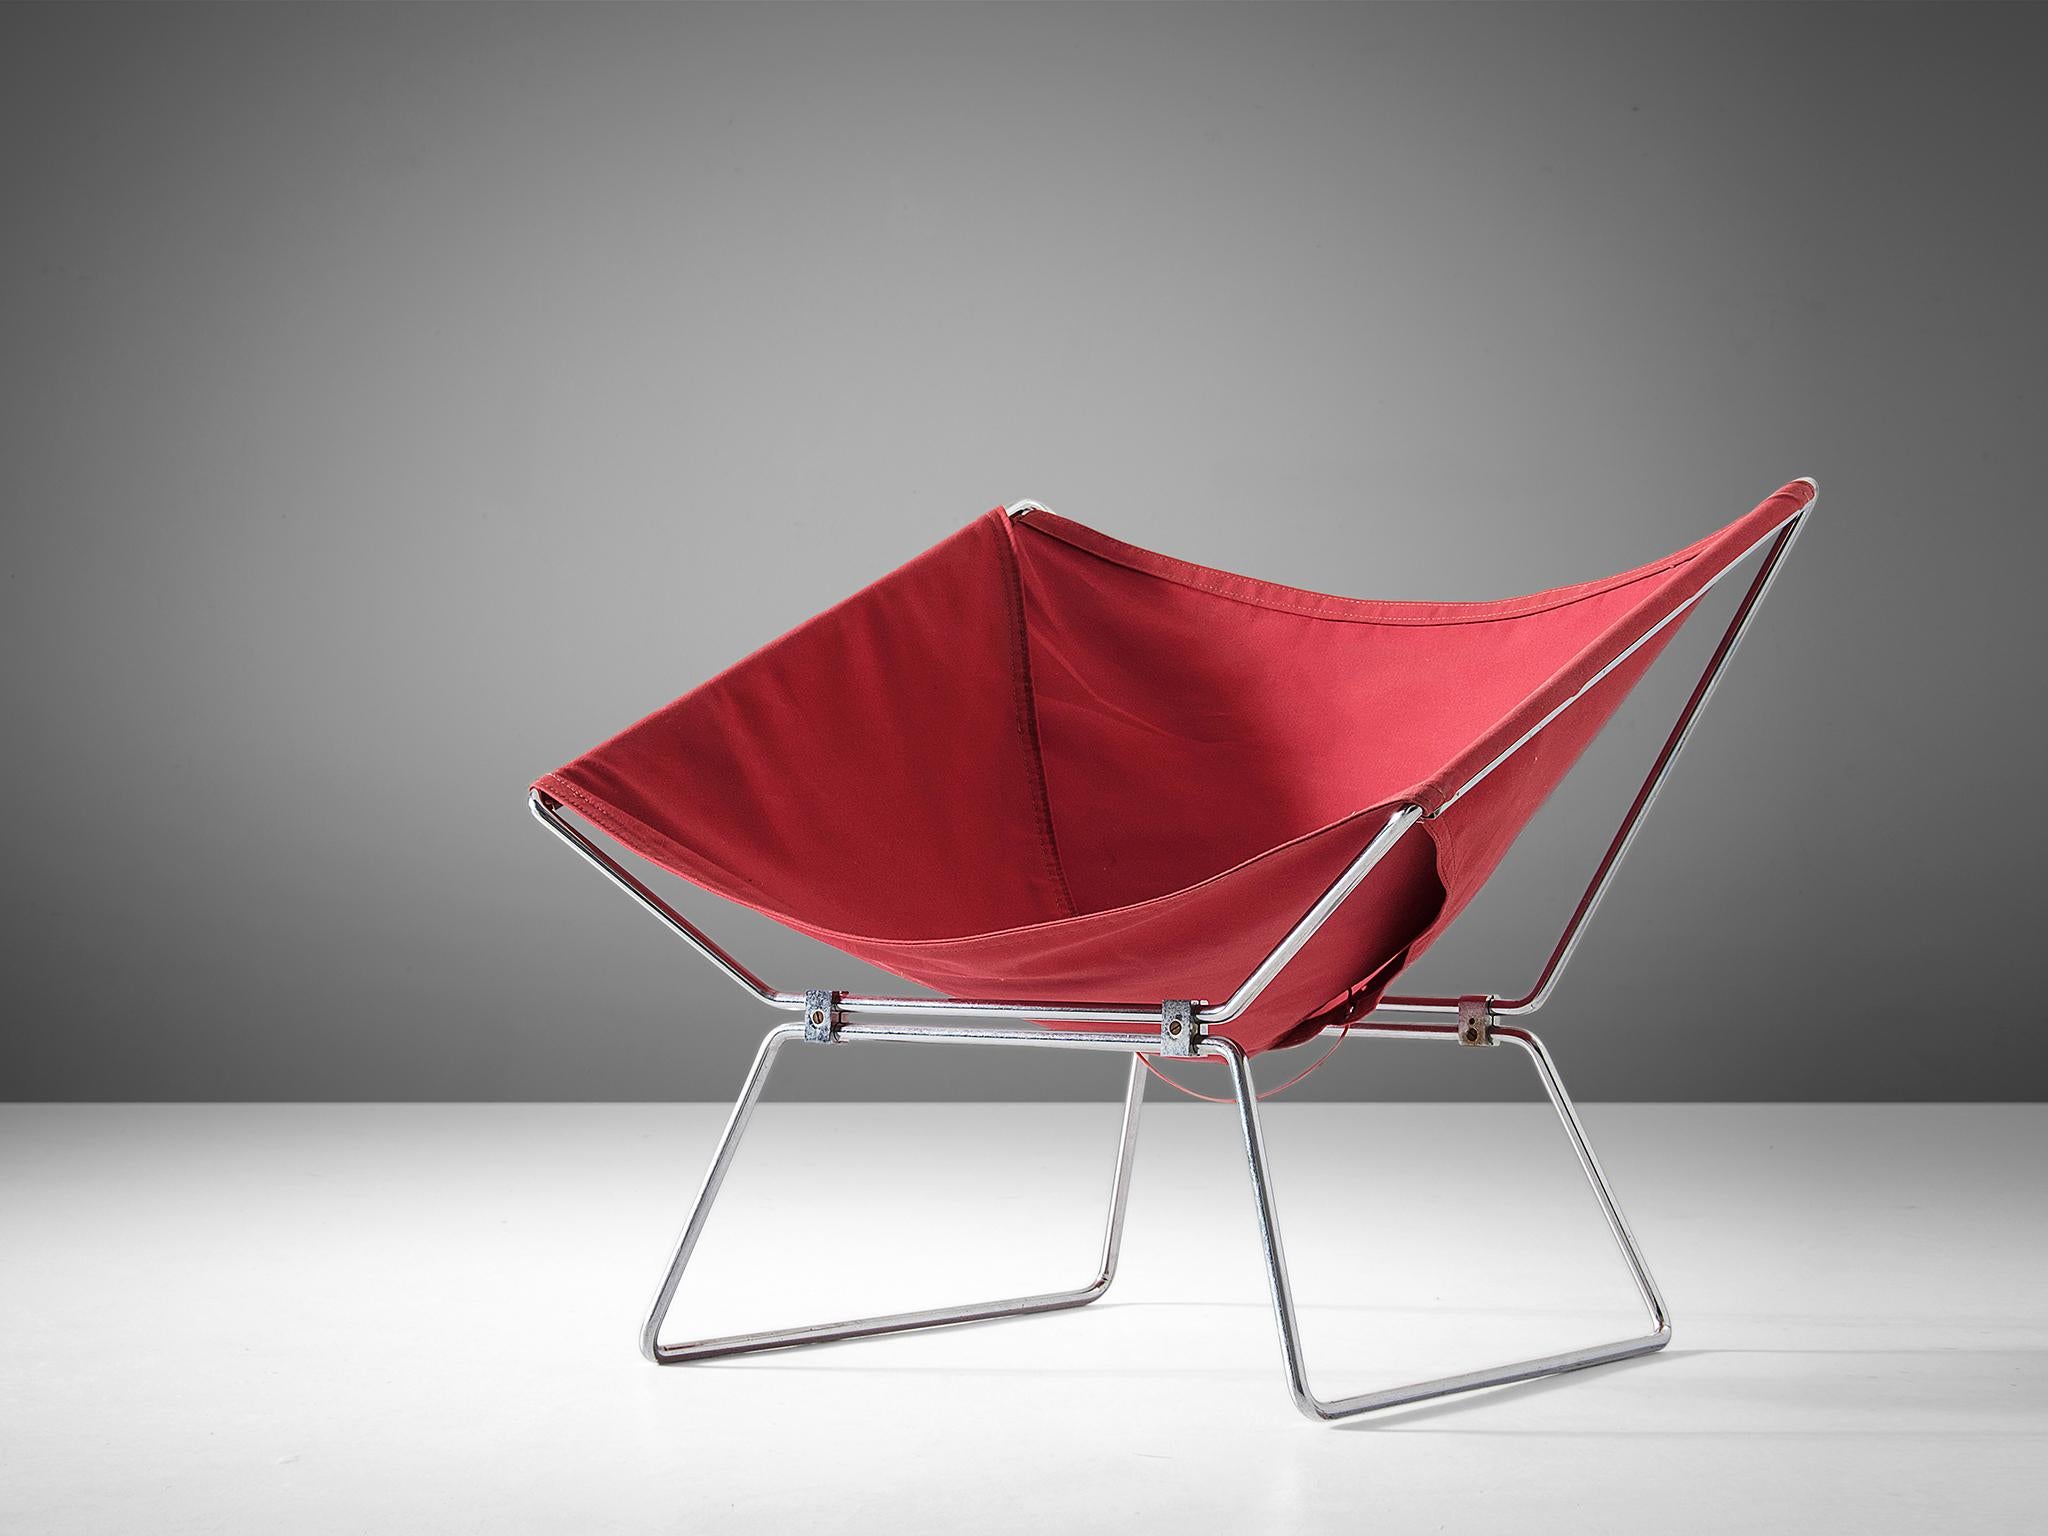 Easy chair model AP14, in canvas and steel, by Pierre Paulin for AP Originals, the Netherlands, 1954.

Very rare easy chair in original red canvas upholstery. This chair was designed by French designer Pierre Paulin for the A. Polak, a Dutch